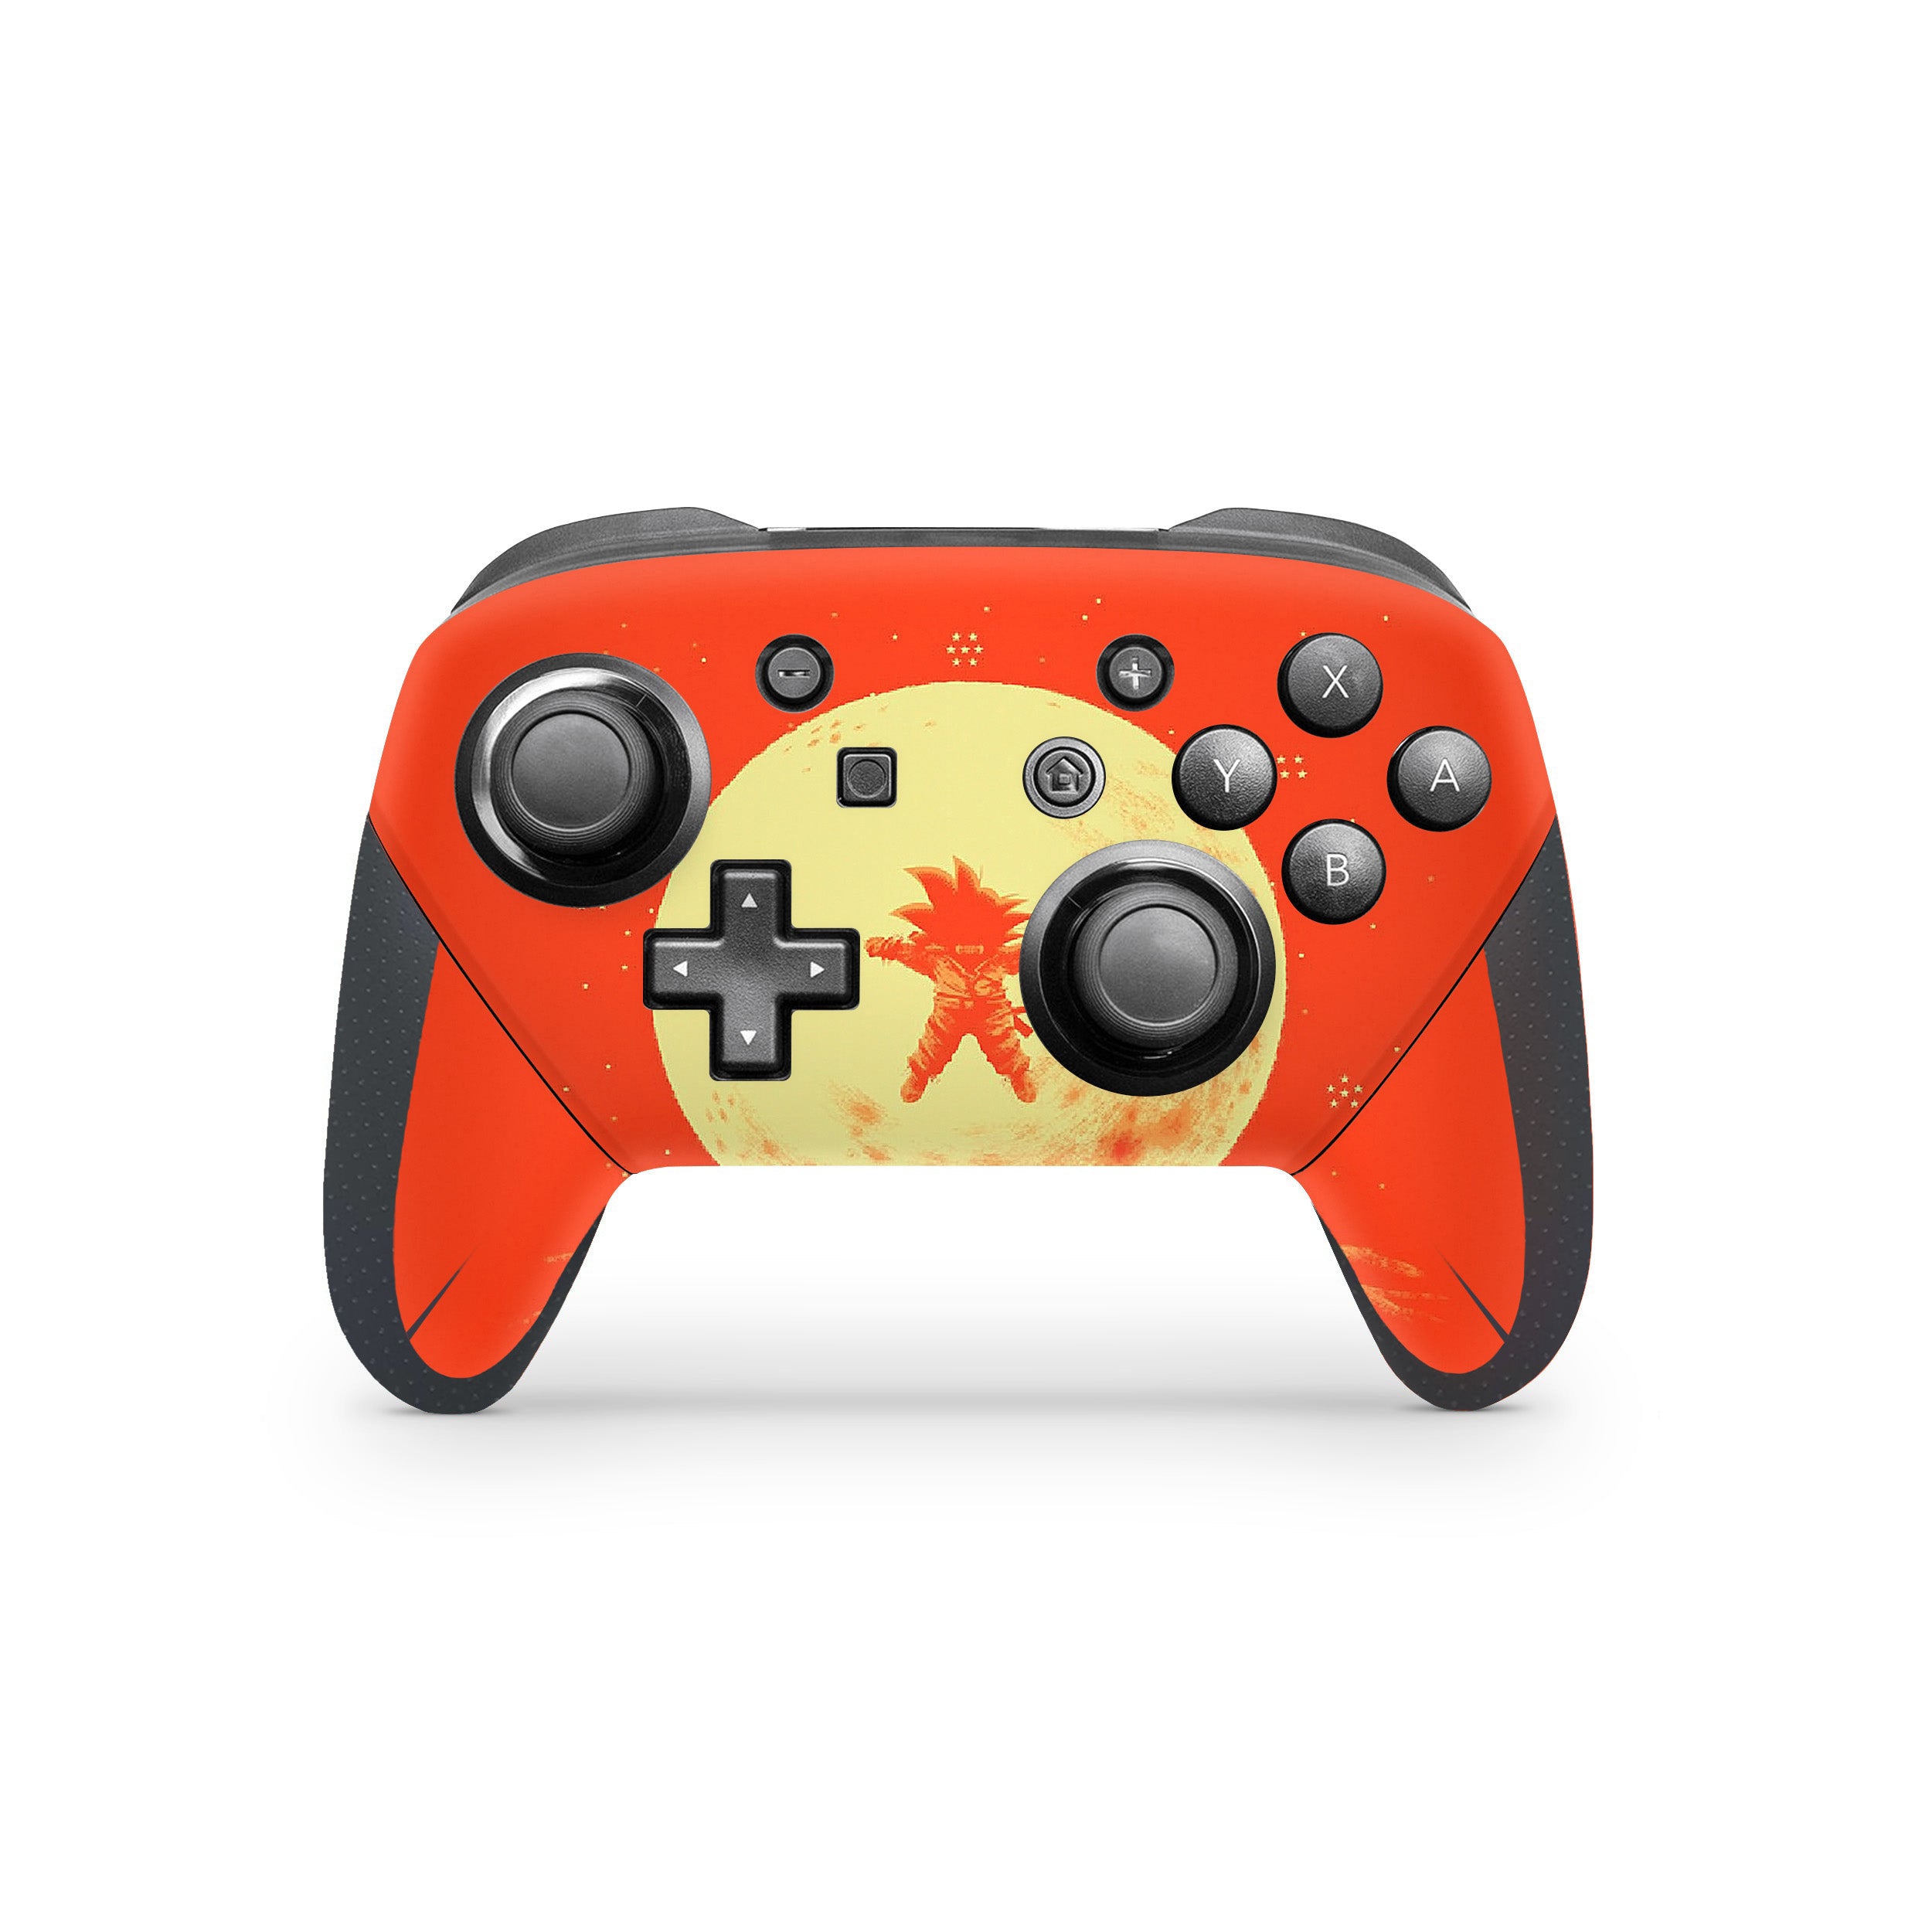 A video game skin featuring a Dragon Ball Z Kid Goku design for the Switch Pro Controller.